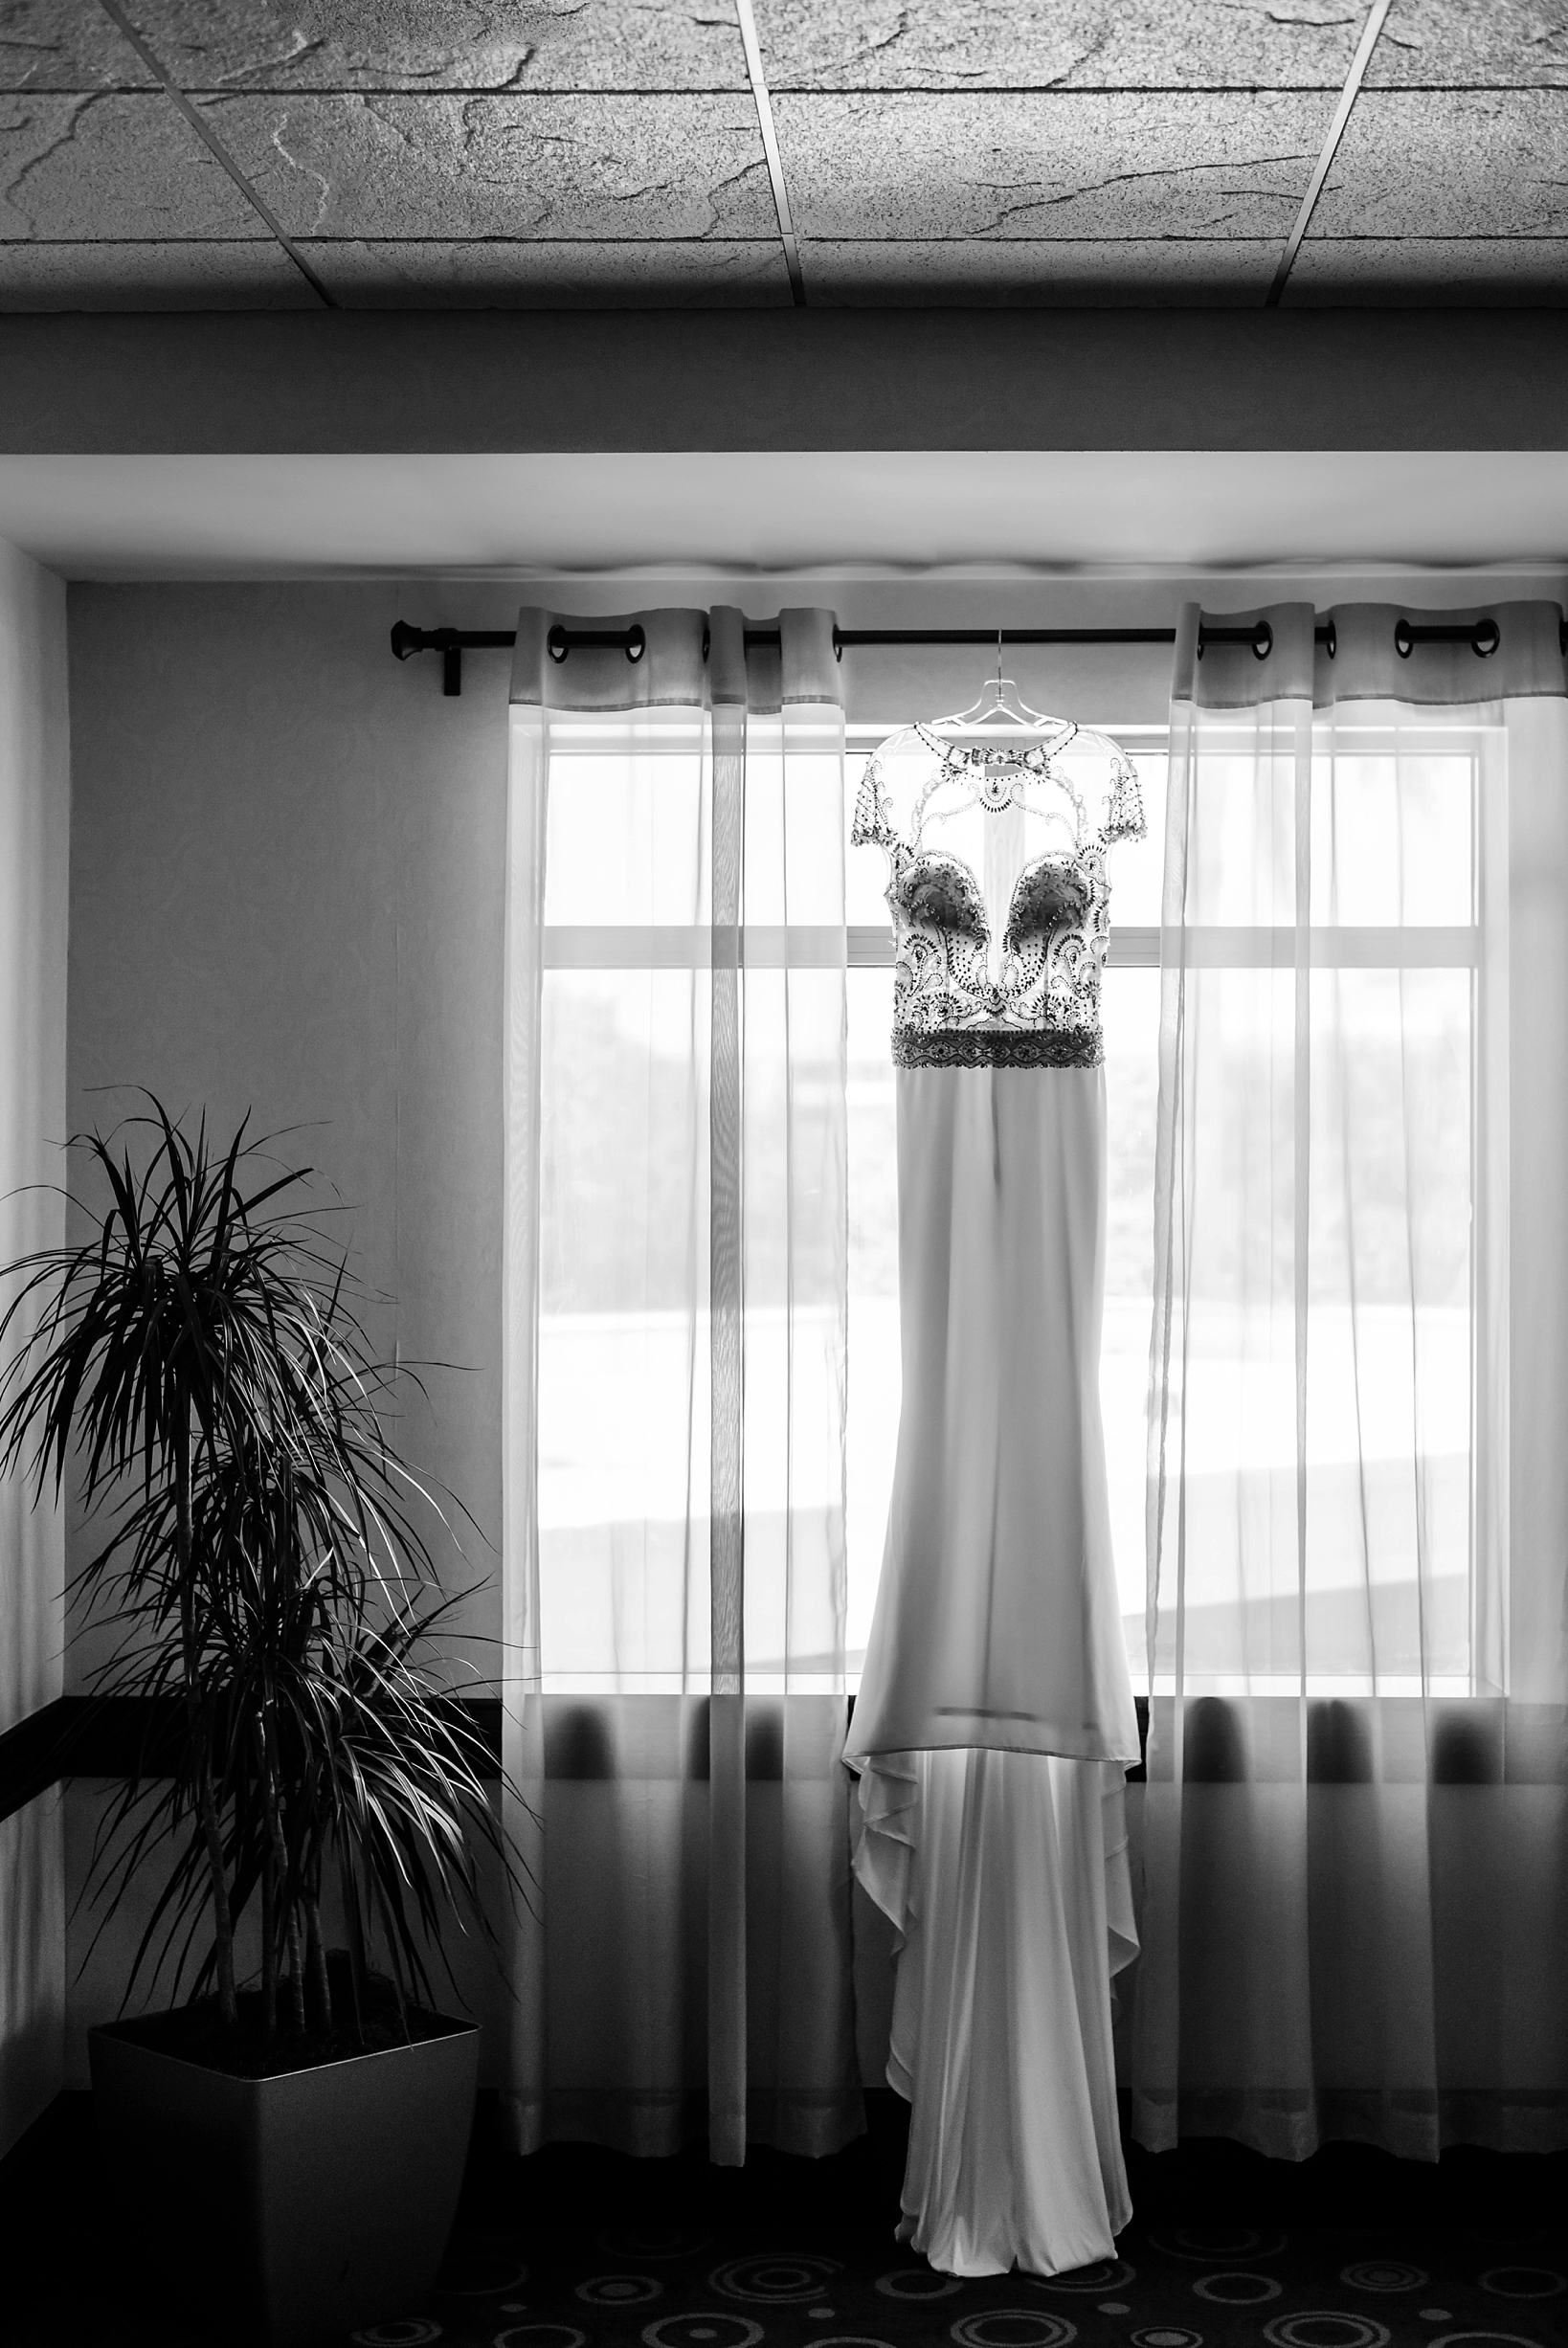 Black and White image of the wedding dress hanging in a window